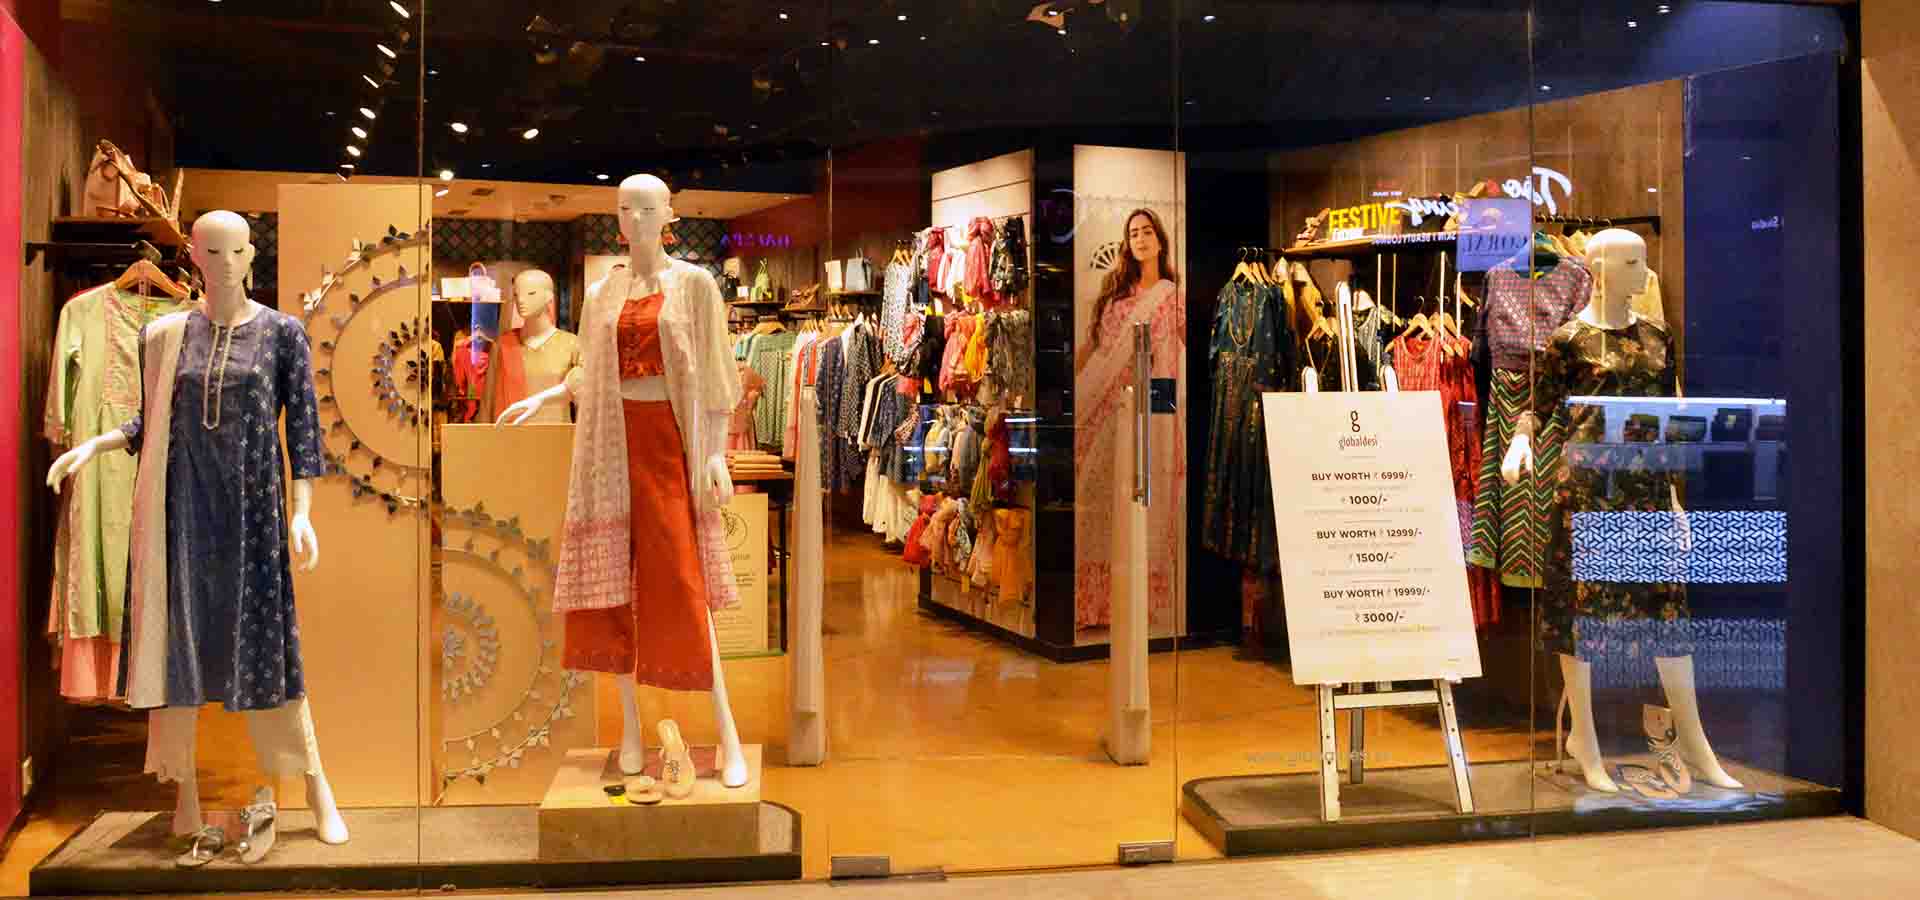 Global Desi store photos in mall